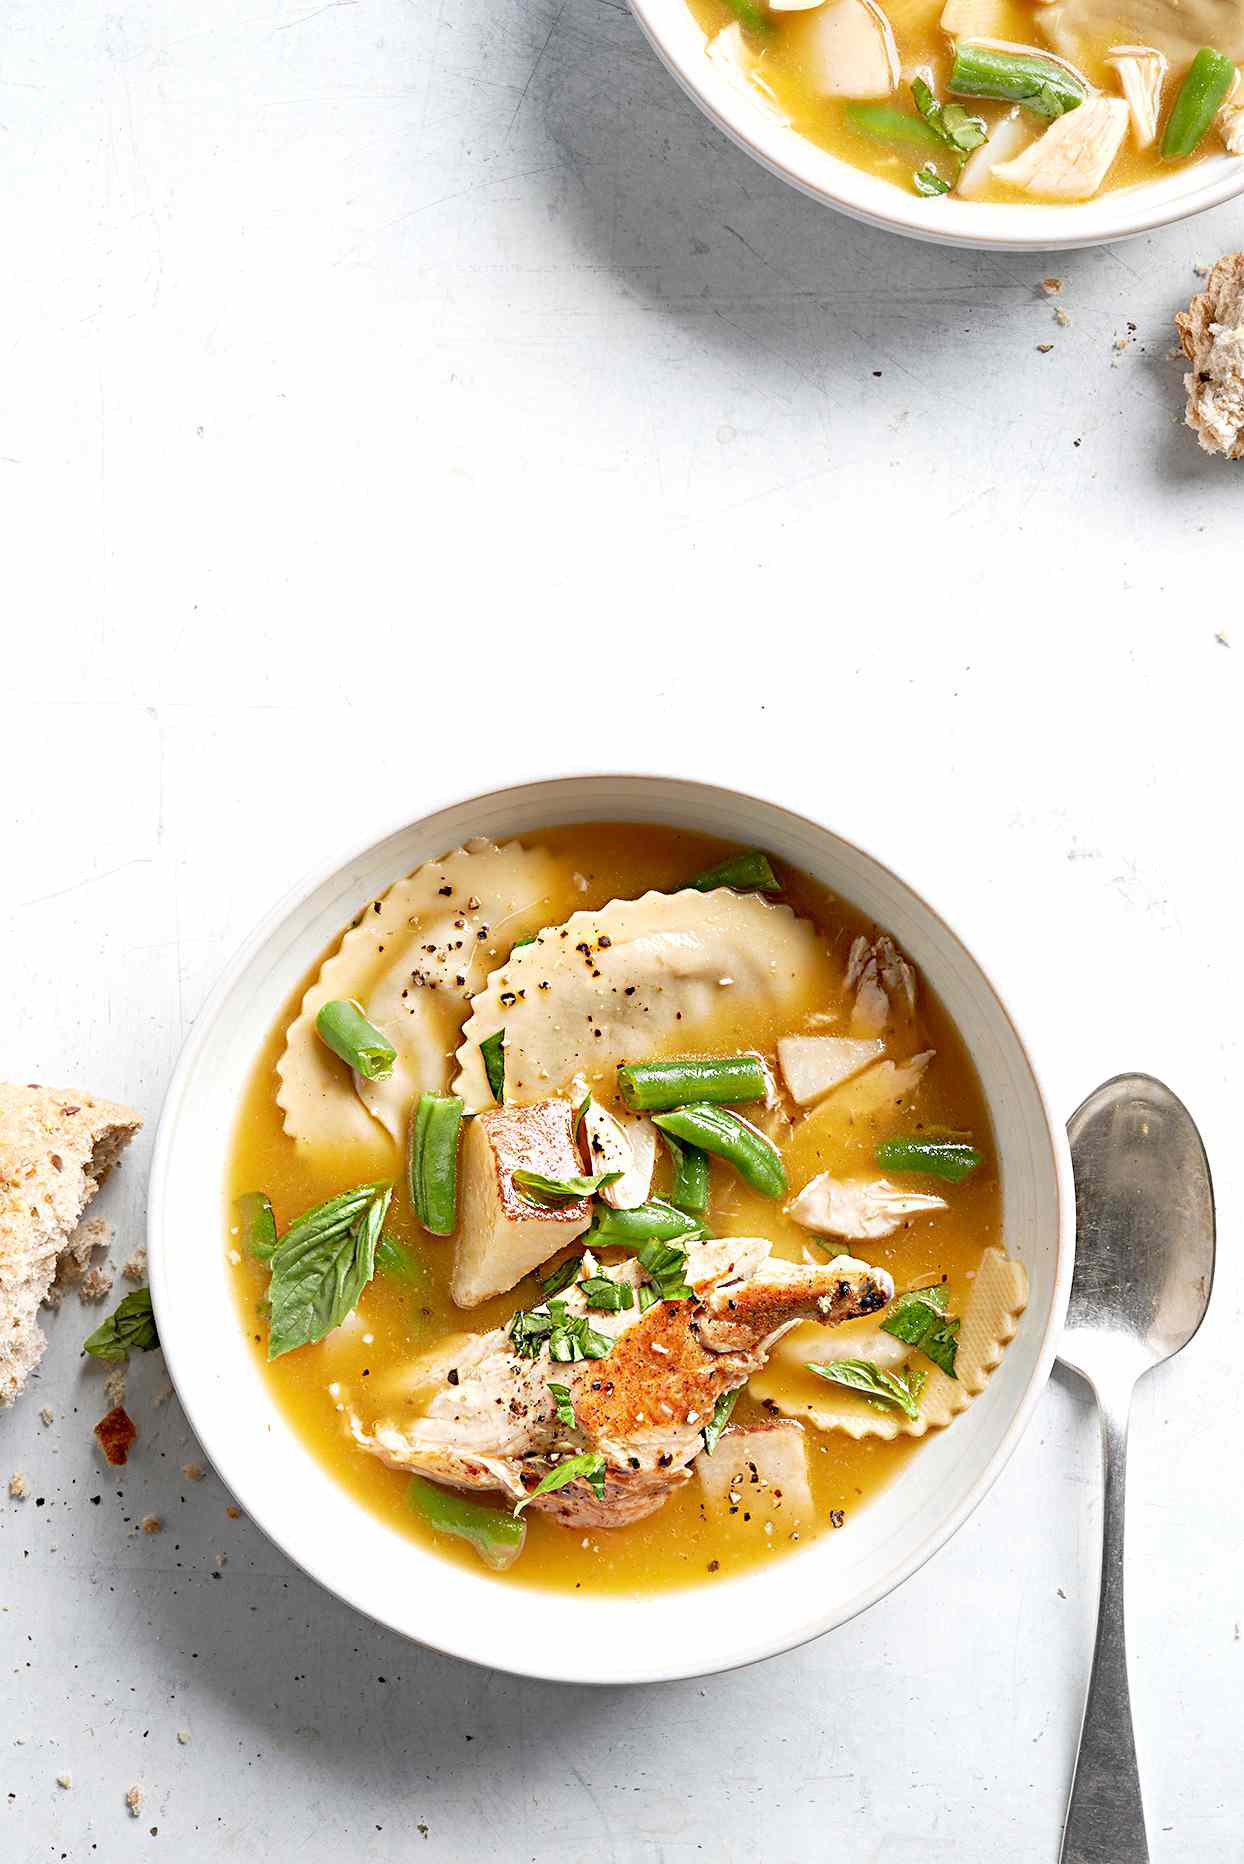 Rosemary and Ravioli Chicken Soup